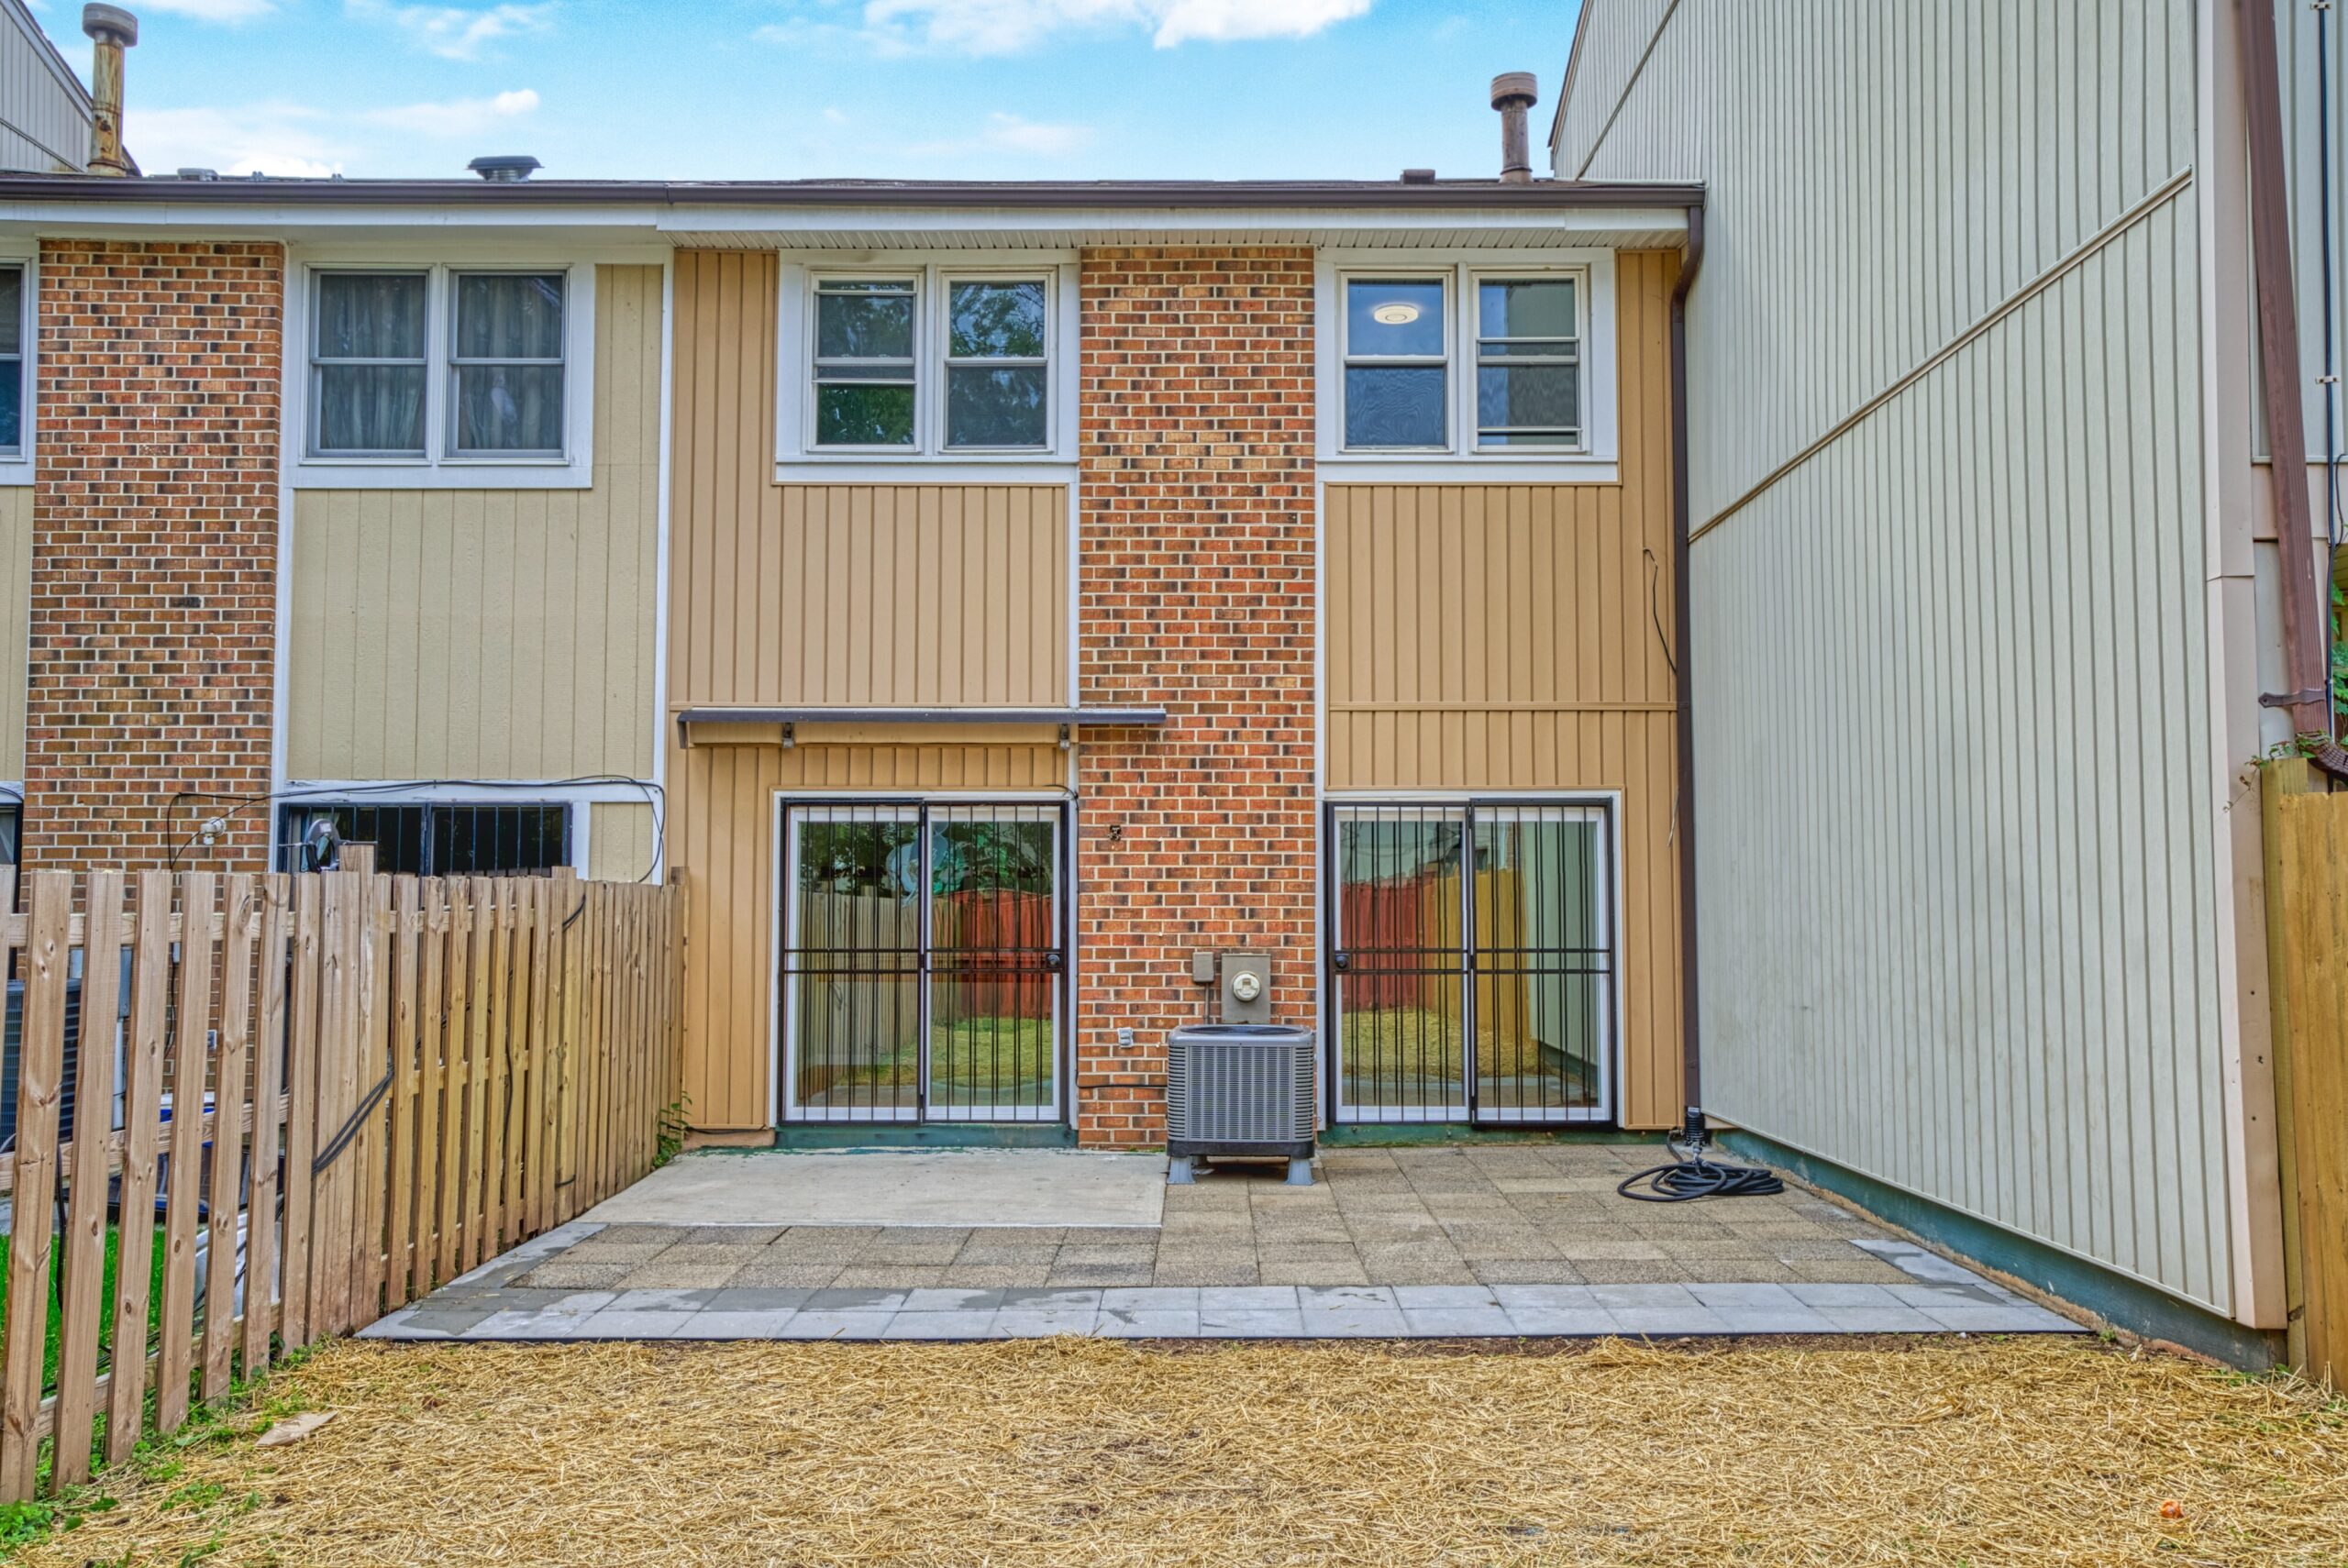 Professional exterior photo of 6302 Arwen Court, Fort Washington, MD - showing the rear of a townhome with tan vertical siding and brown brick with 2 double sliding door exits to a patio